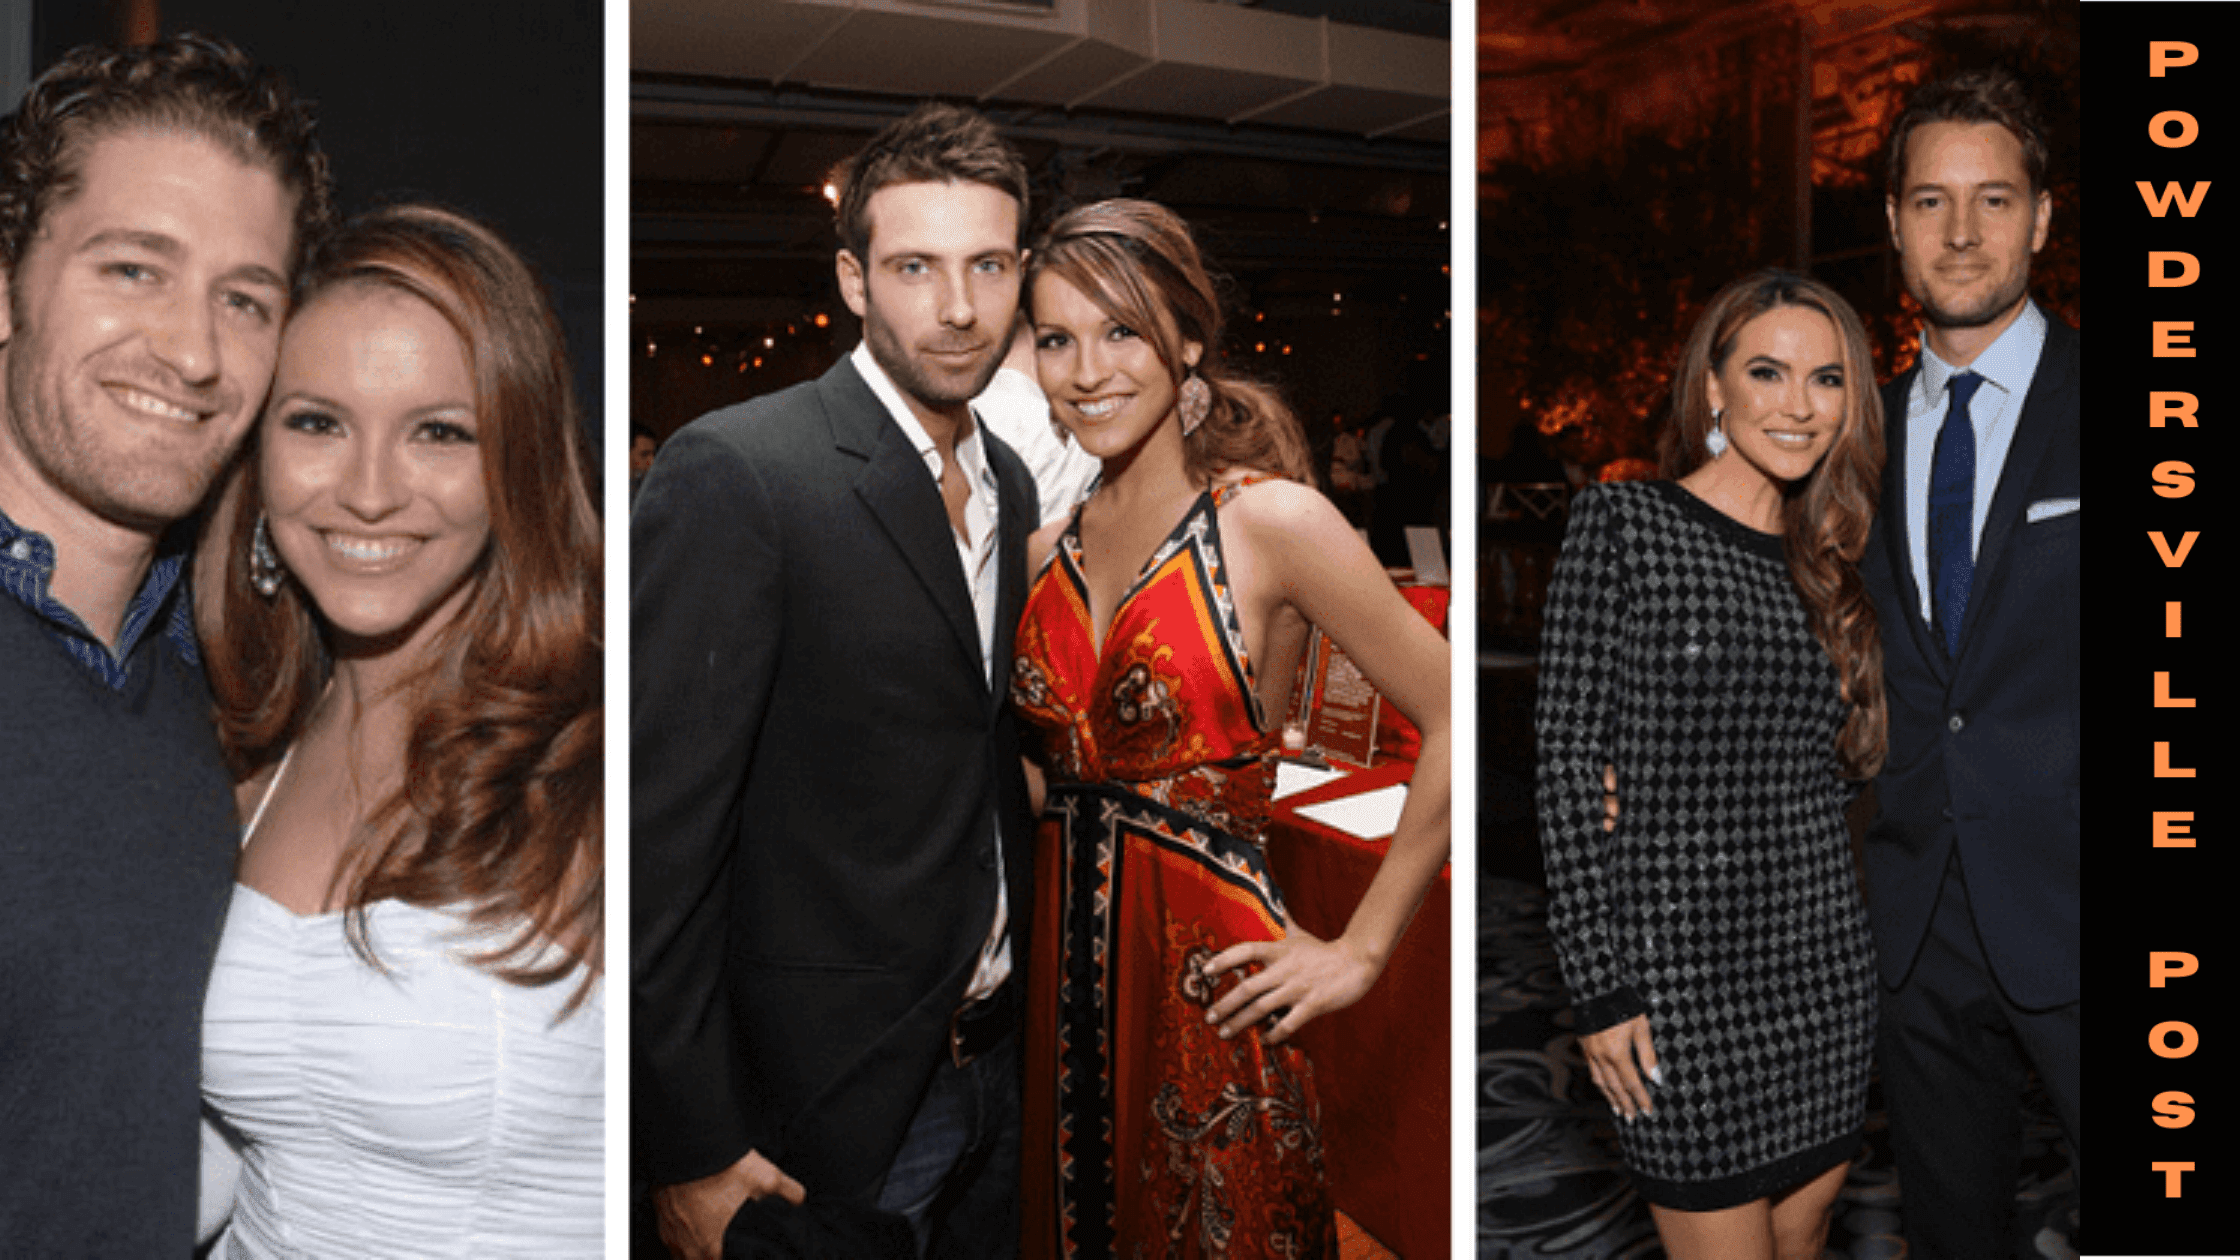 Chrishell Stause's Complete Dating History; Who Are The Boyfriends Who Broke Up Recently